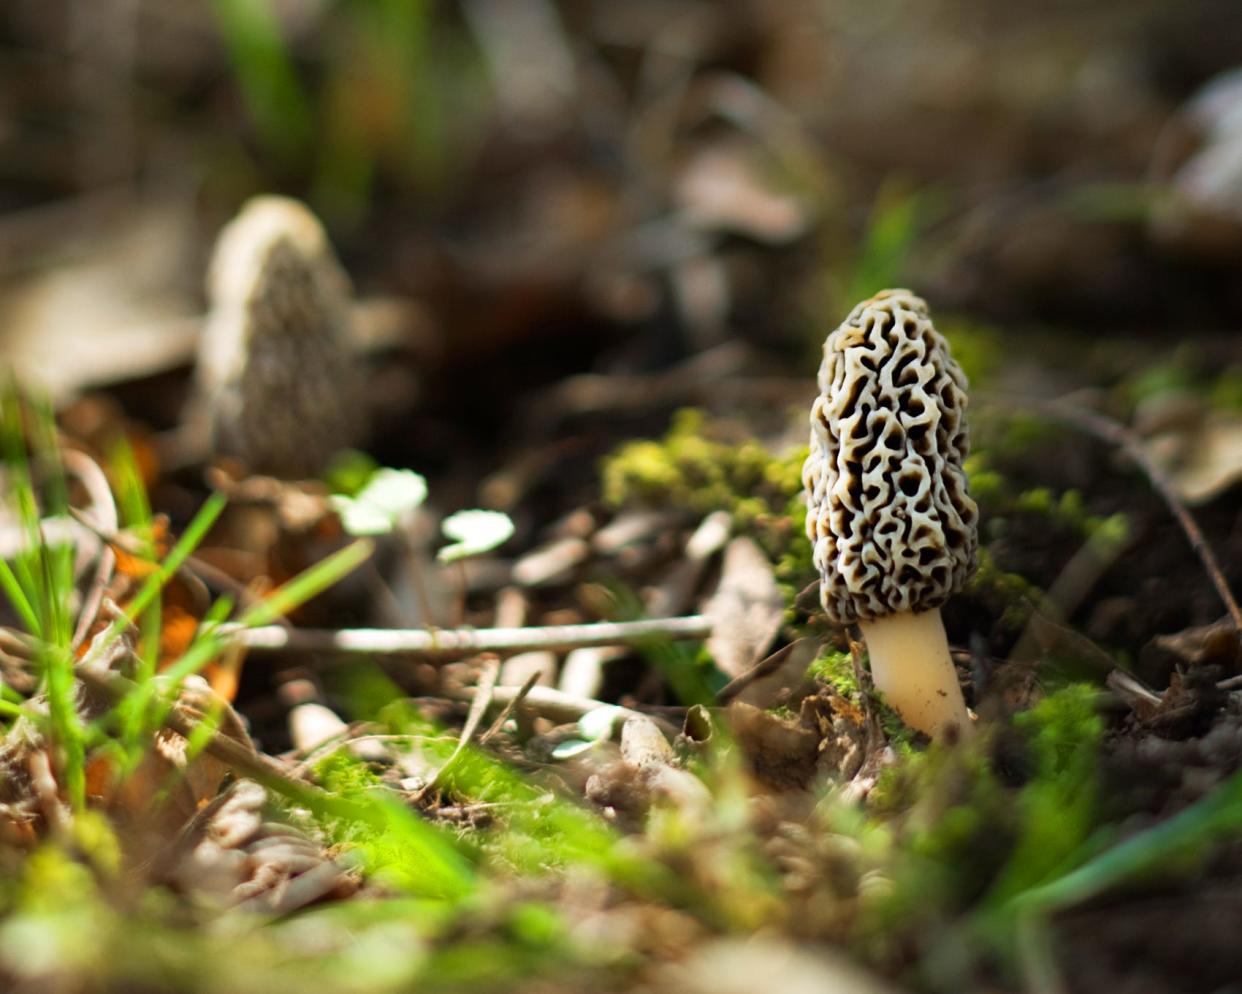 Morel mushrooms are starting to emerge in central Illinois.